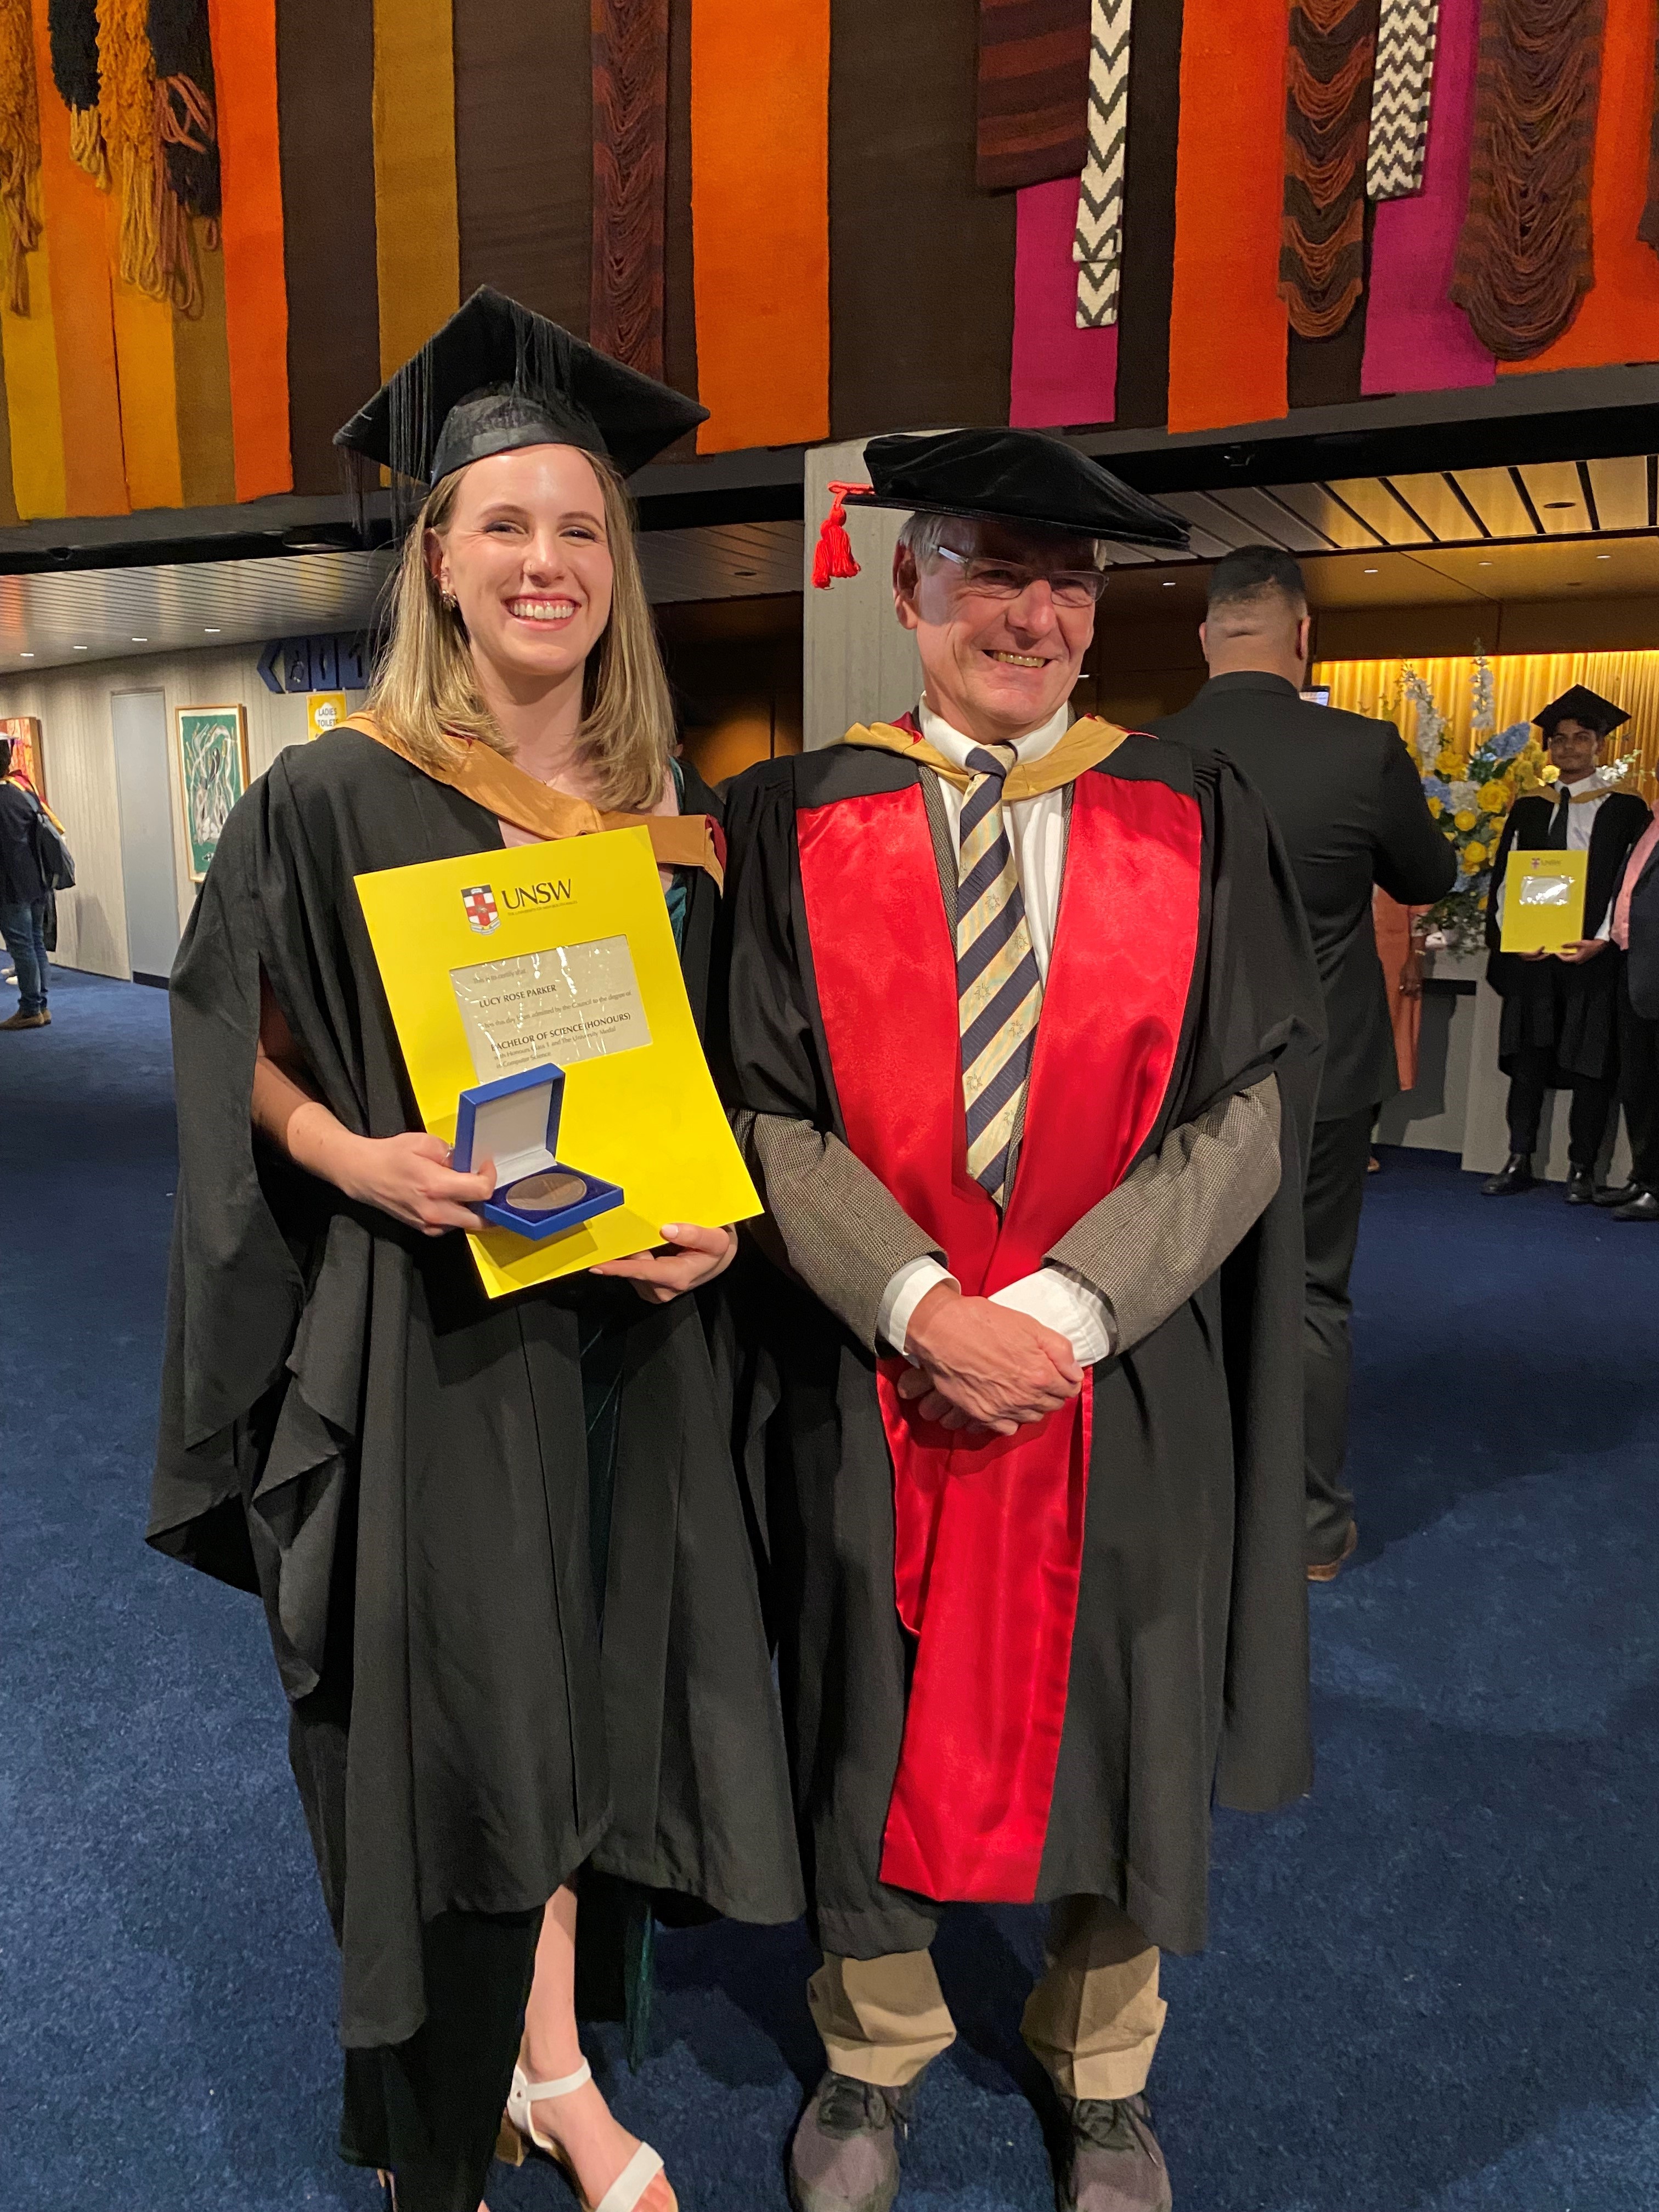 Lucy Parker and her proud supervisor Gernot Heiser at Lucy's graduation, where she won the University Medal.